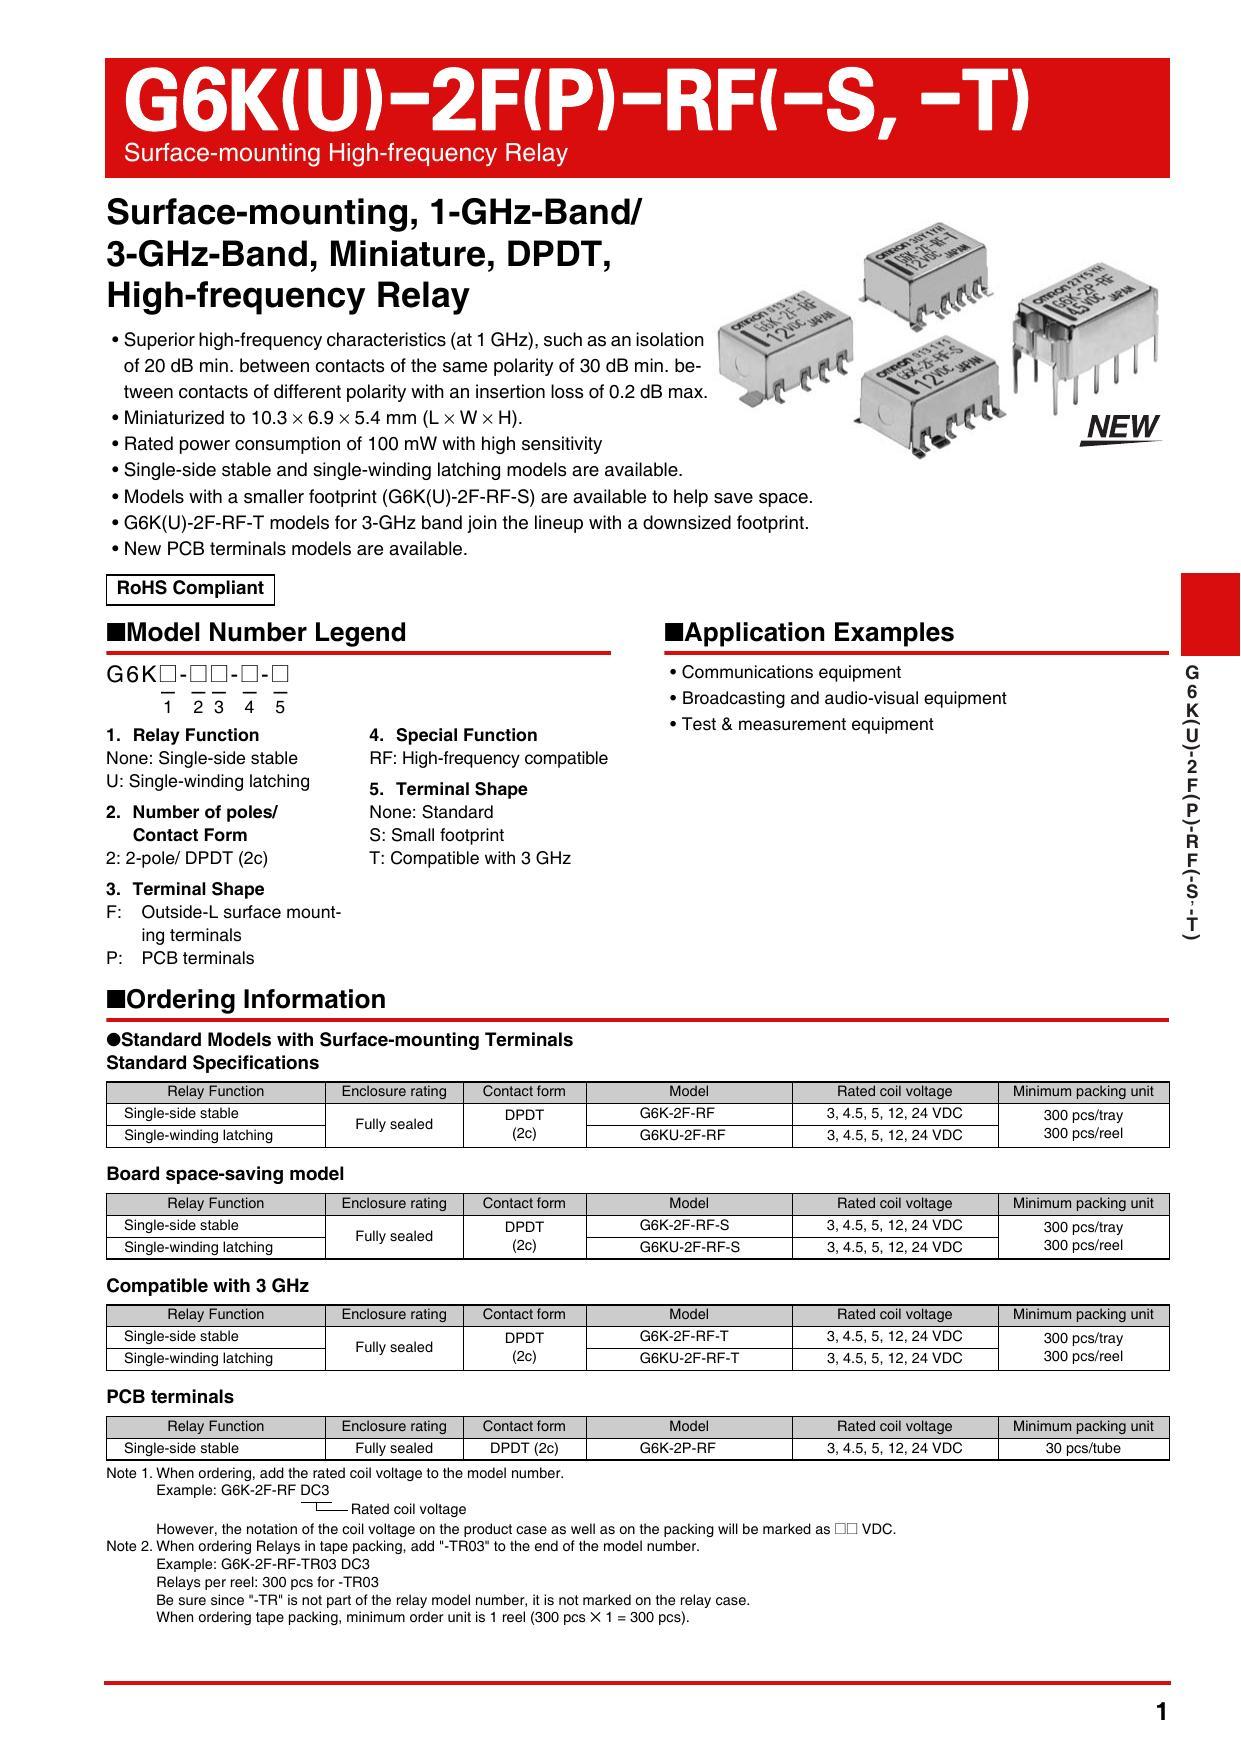 surface-mounting-high-frequency-relay-g6ku-2frft.pdf